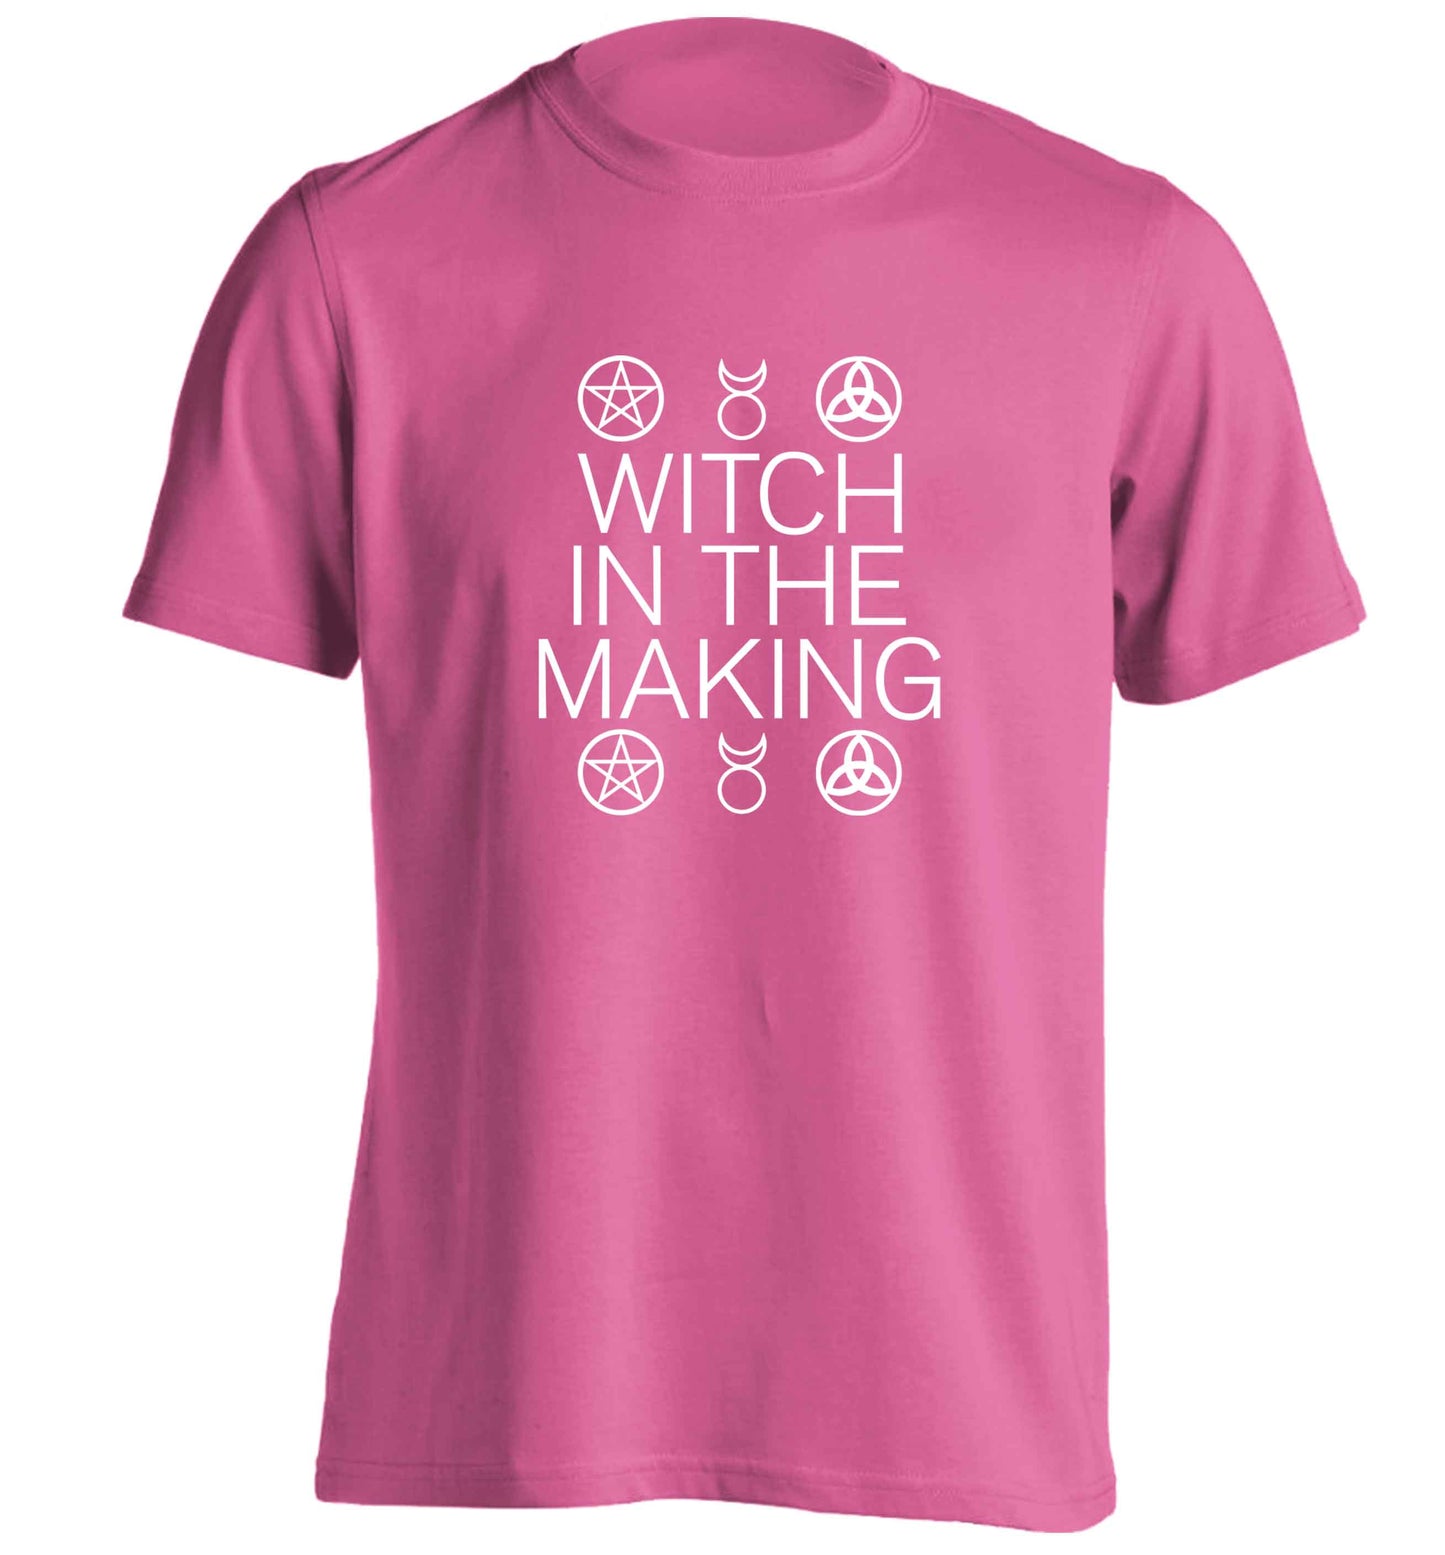 Witch in the making adults unisex pink Tshirt 2XL